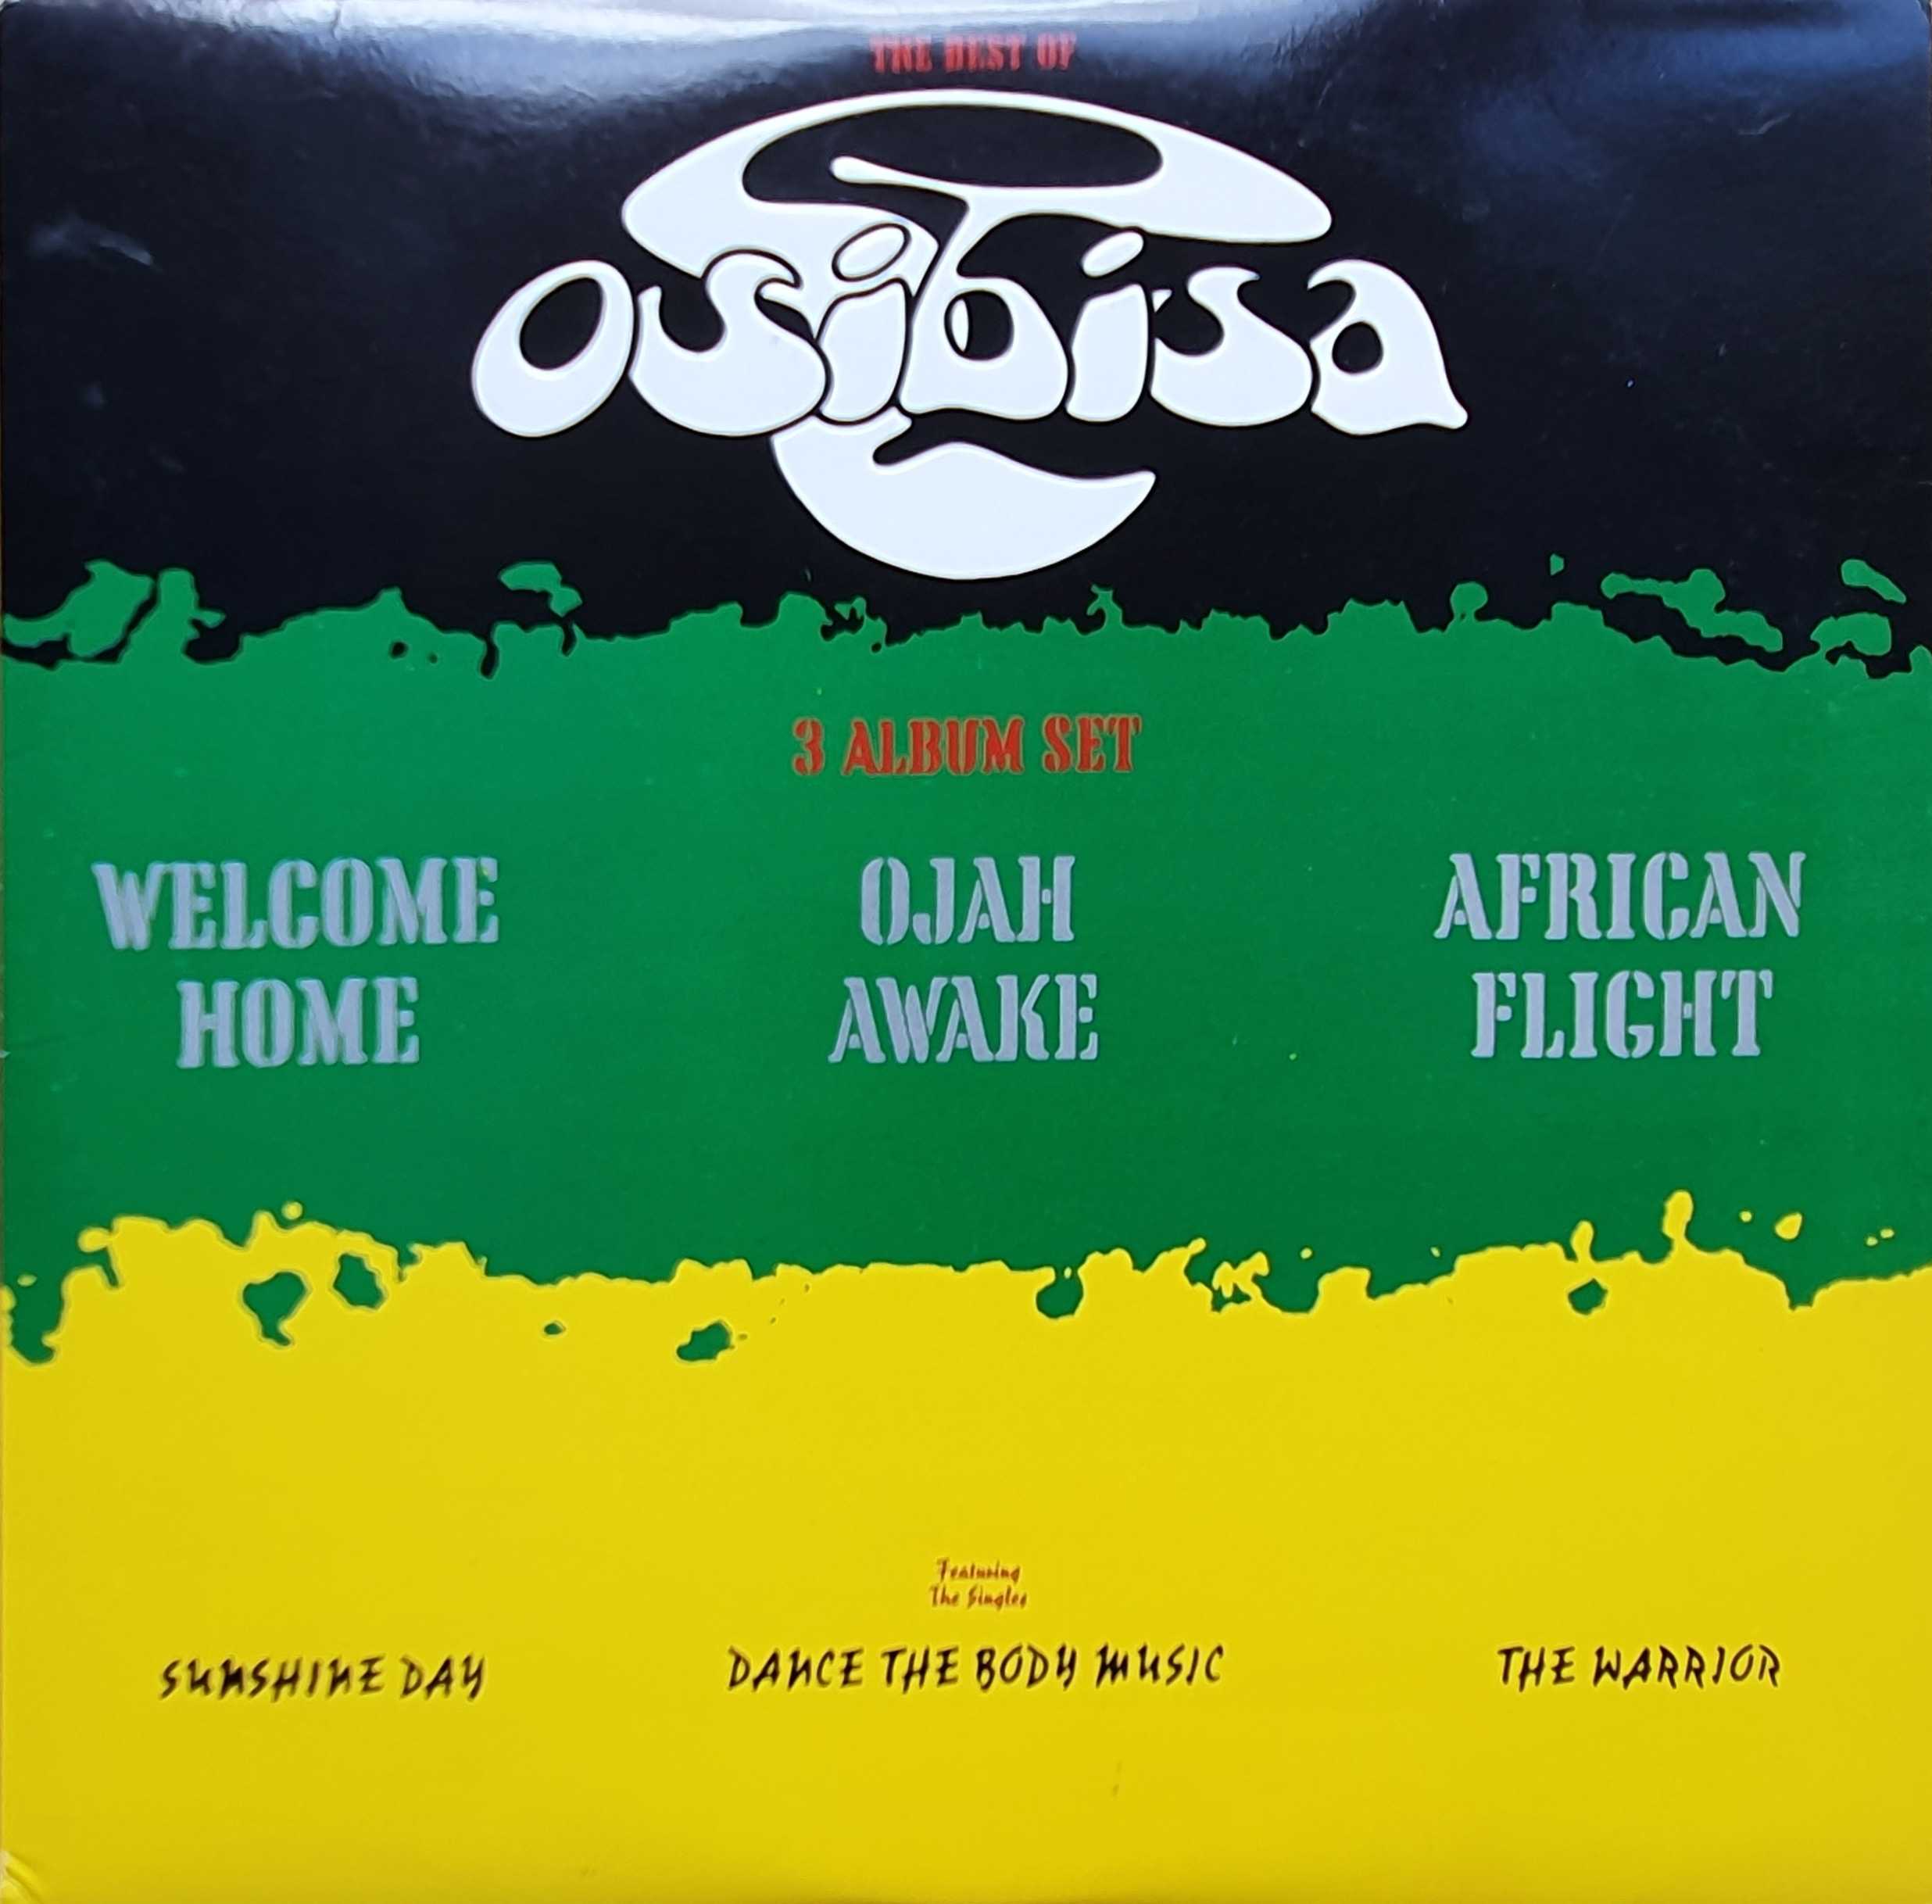 Picture of REF 776 The best of Osibisa by artist Osibisa from the BBC albums - Records and Tapes library